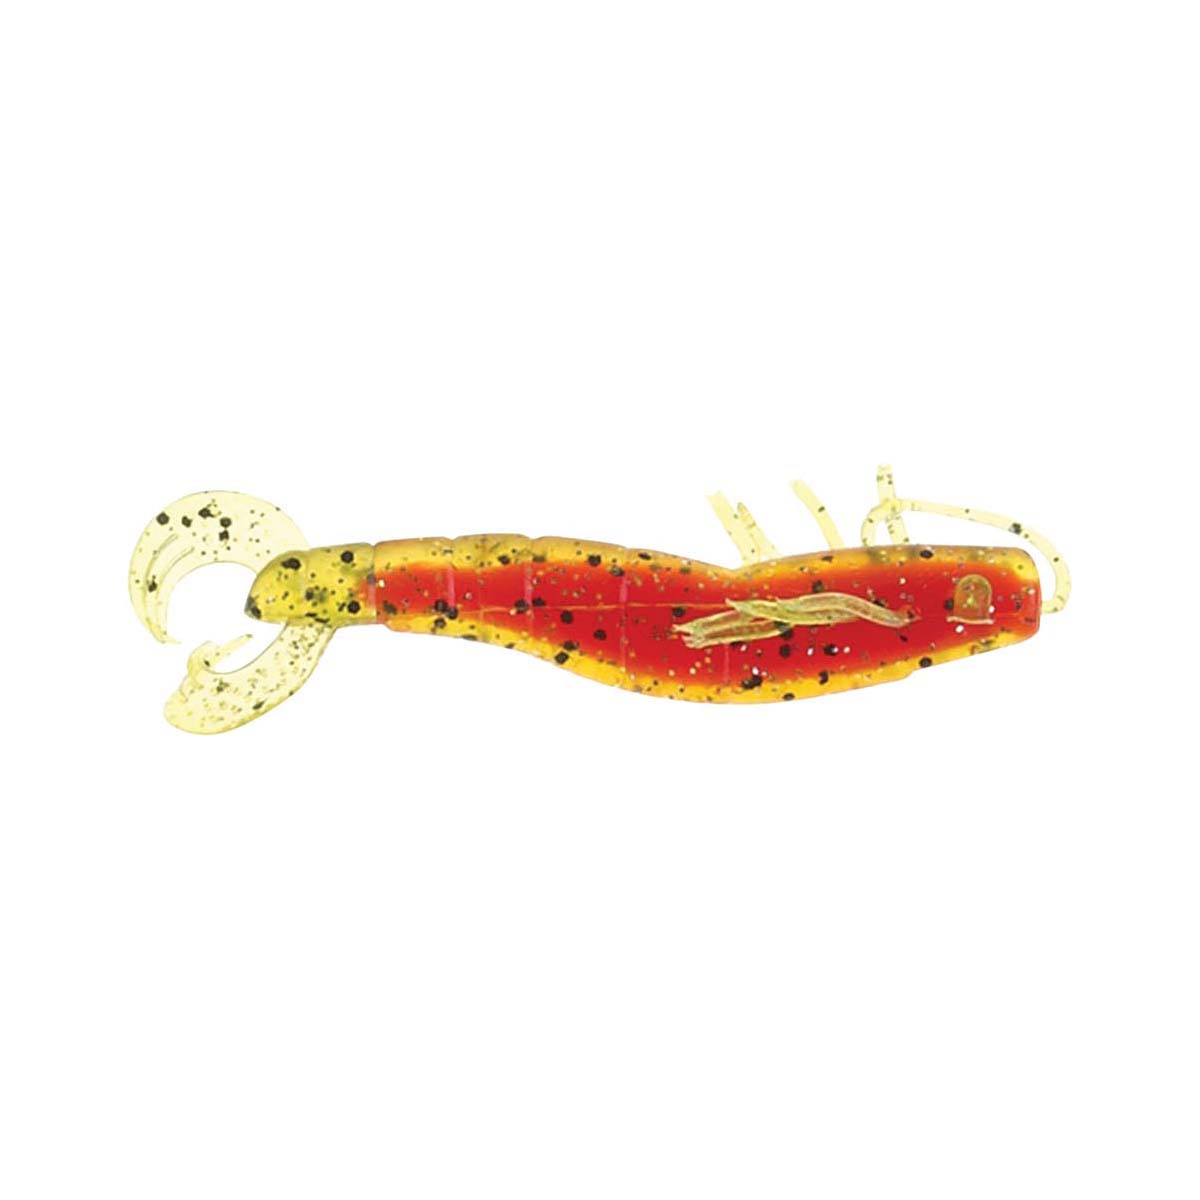 Atomic Plazos Prong Soft Plastic Lure 3in Radioactive Rooster